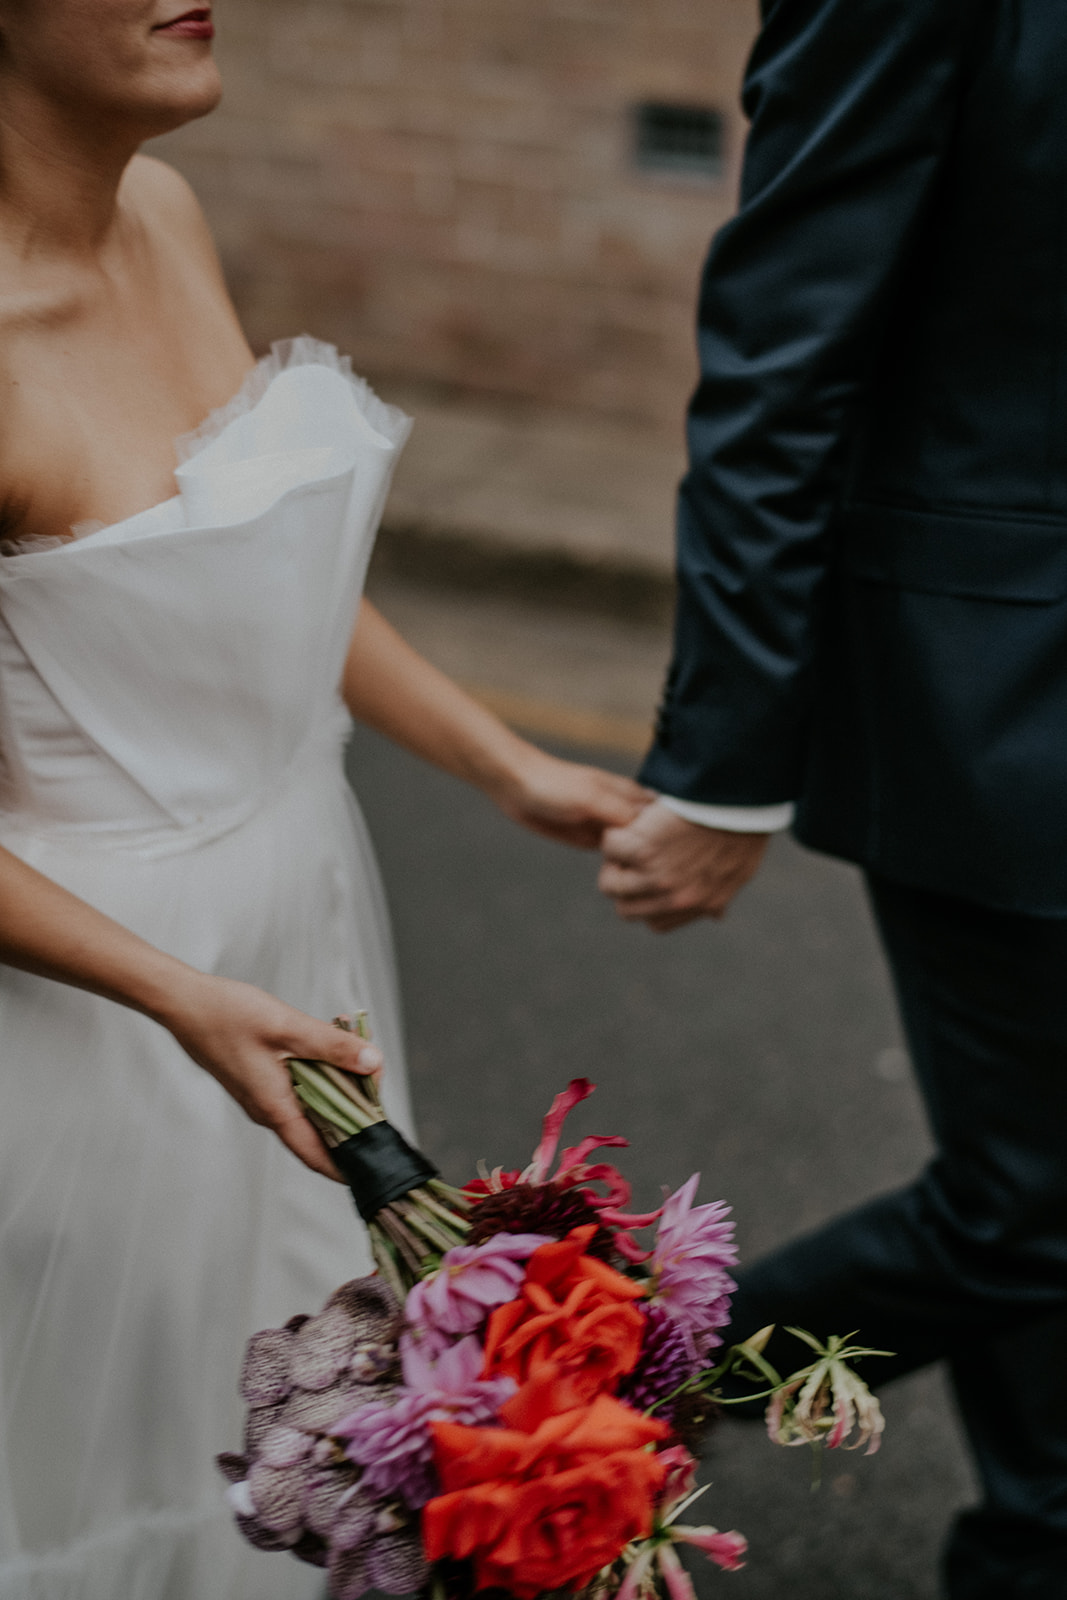 Scott Surplice bride and groom hold hands with bouquet in other hand